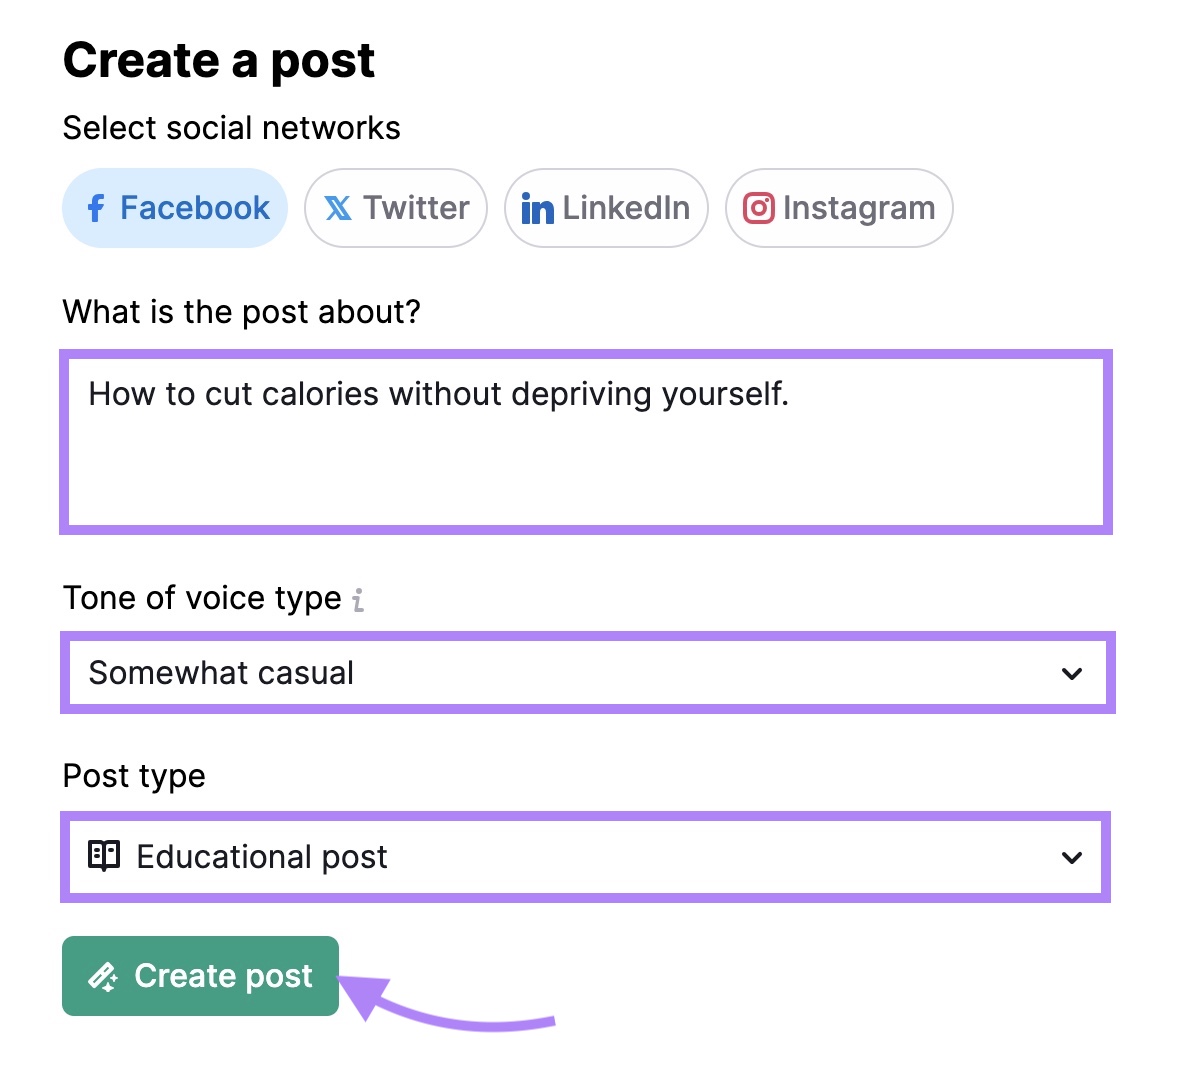 "Create a post" page on "ContentShake AI" with options to select a topic, tone of voice, and post type.